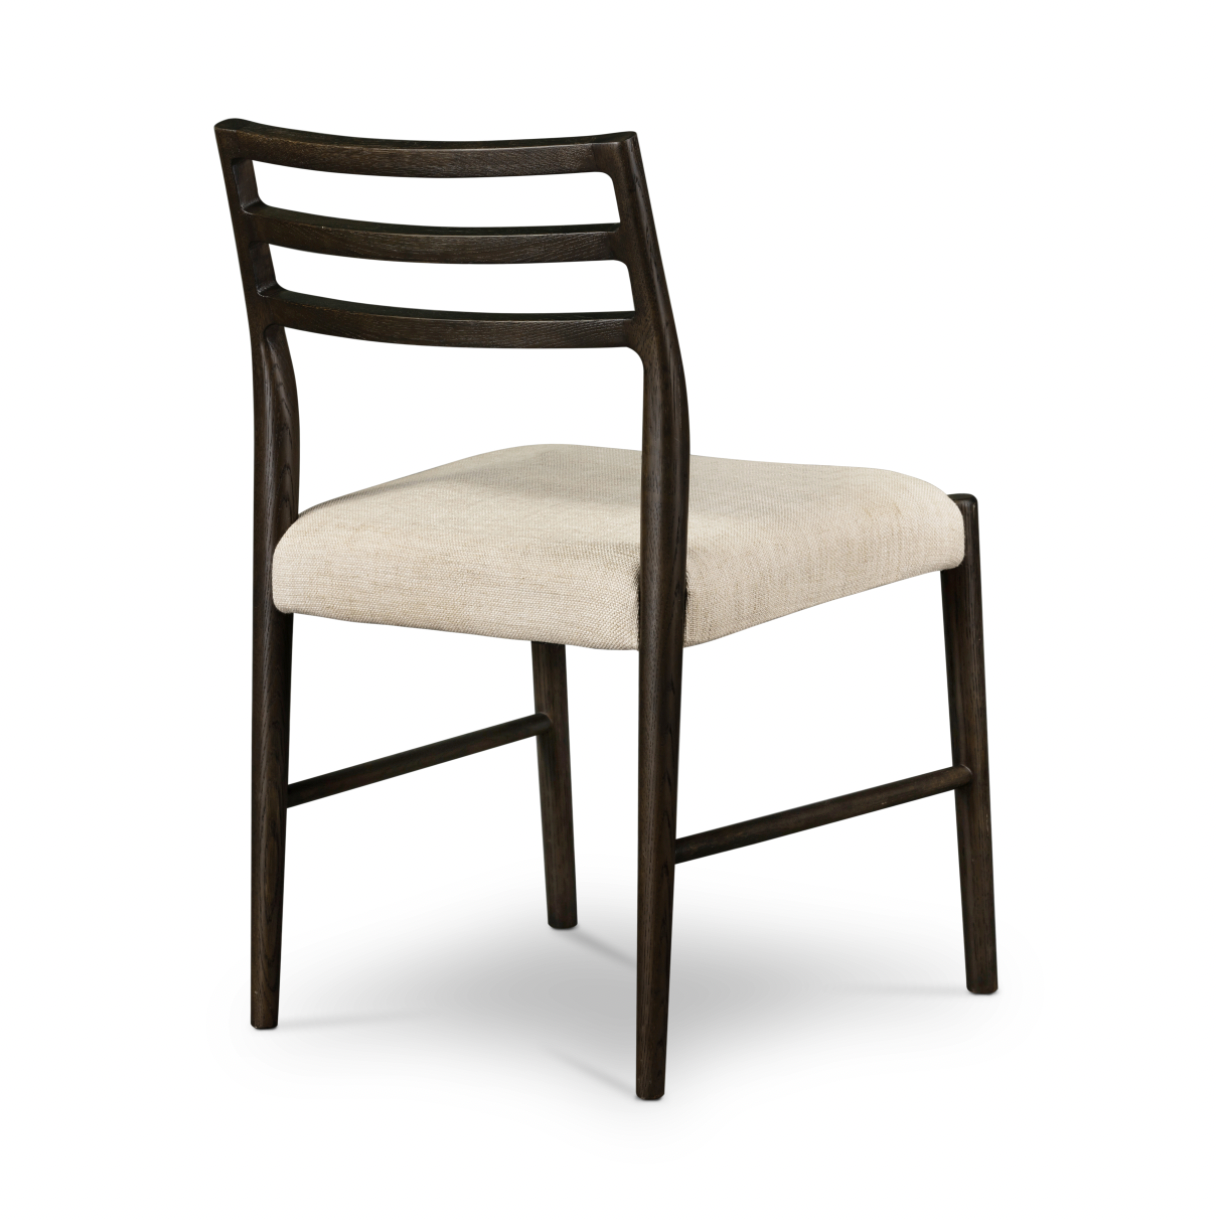 We love the ladderback chair of this Glenmore Light Carbon Dining Chair. The carbon-toned seating blends cotton with linen and elevates the space for any dining room or kitchen area.   Overall Dimensions: 21.75"w x 22.00"d x 34.00"h